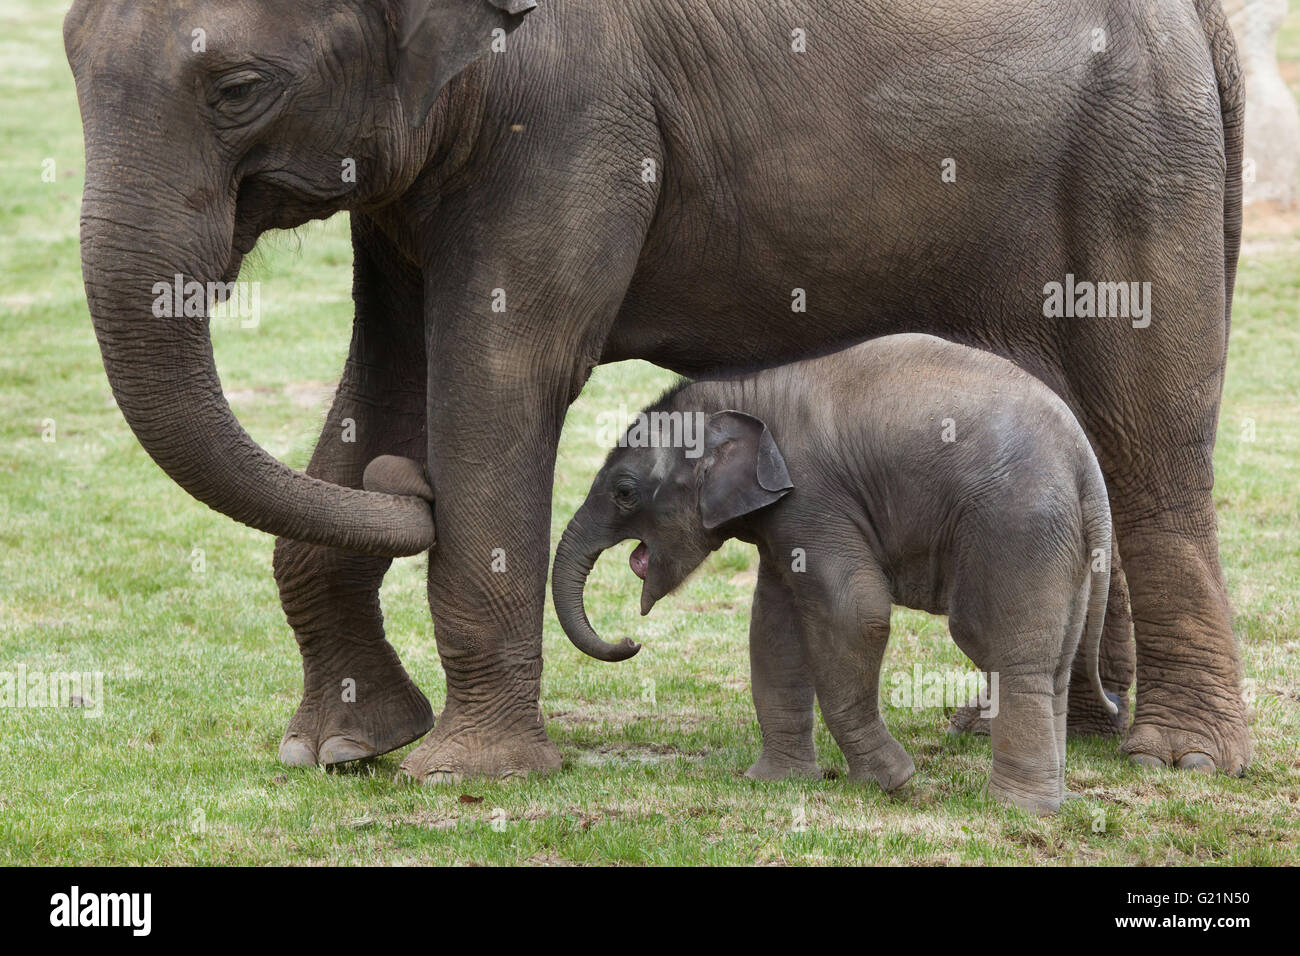 One-month-old Indian elephant (Elephas maximus indicus) named Maxmilian with its mother Janita at Prague Zoo, Czech Republic. Stock Photo